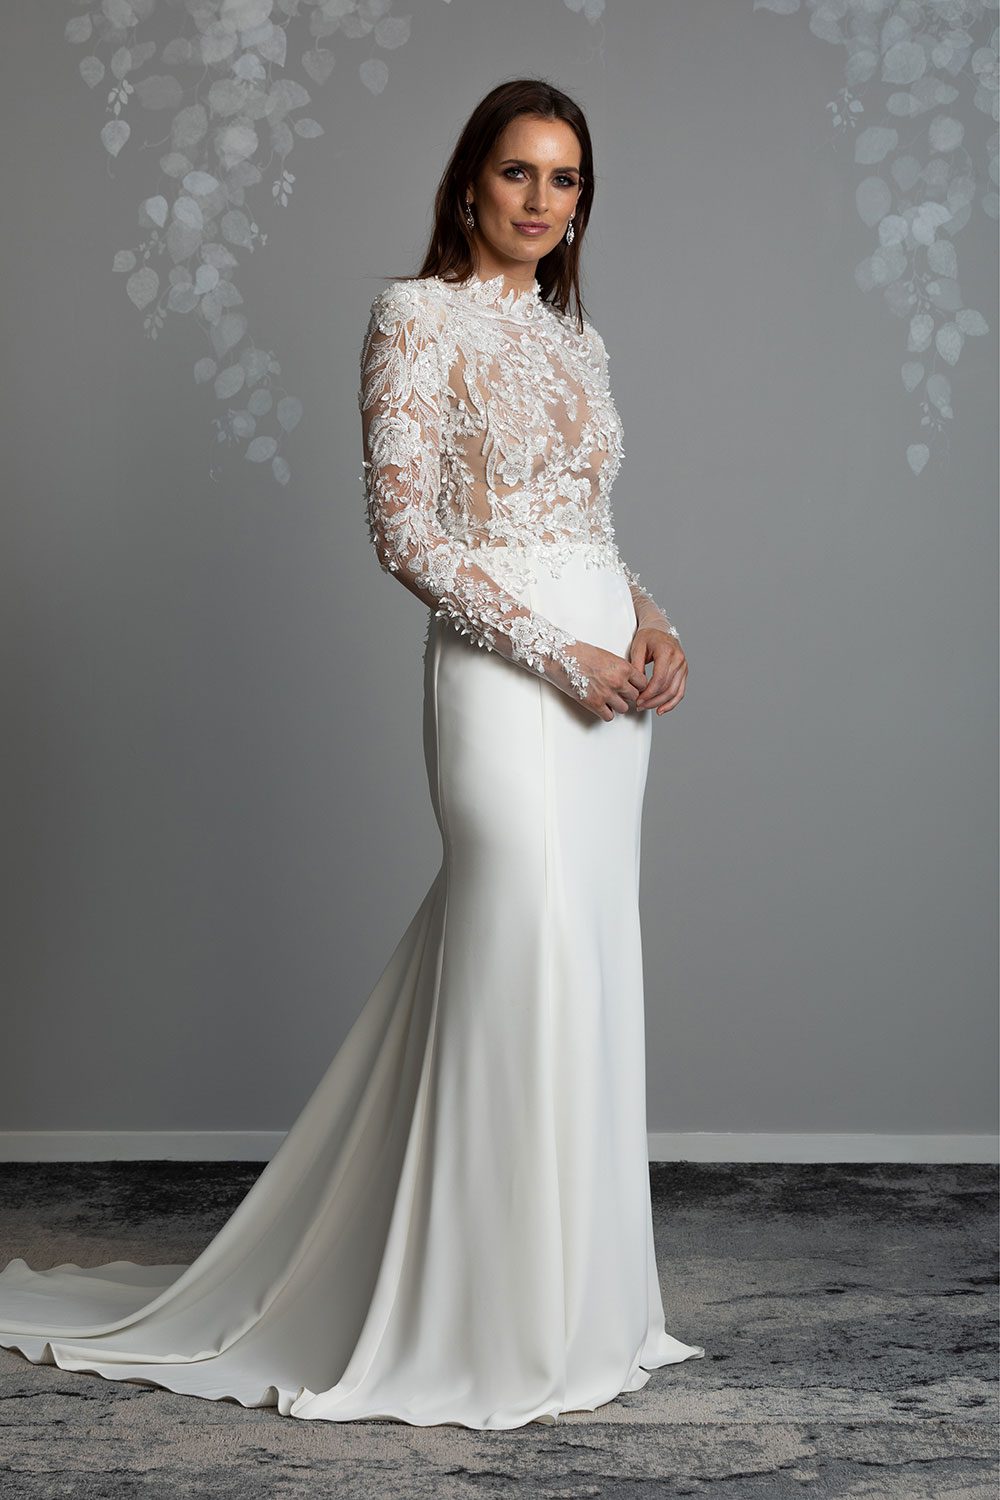 Moana Wedding gown from Vinka Design - Spectacular wedding dress perfect for the modern bride who still wants a classic spark! 3D lace embroidery complemented by a high neckline, fitted sleeves, and stunning low back into a flare train. Model with hands clasped in front wearing stunning classic high neck dress with long lace embroidered sleeves and fit and flare train